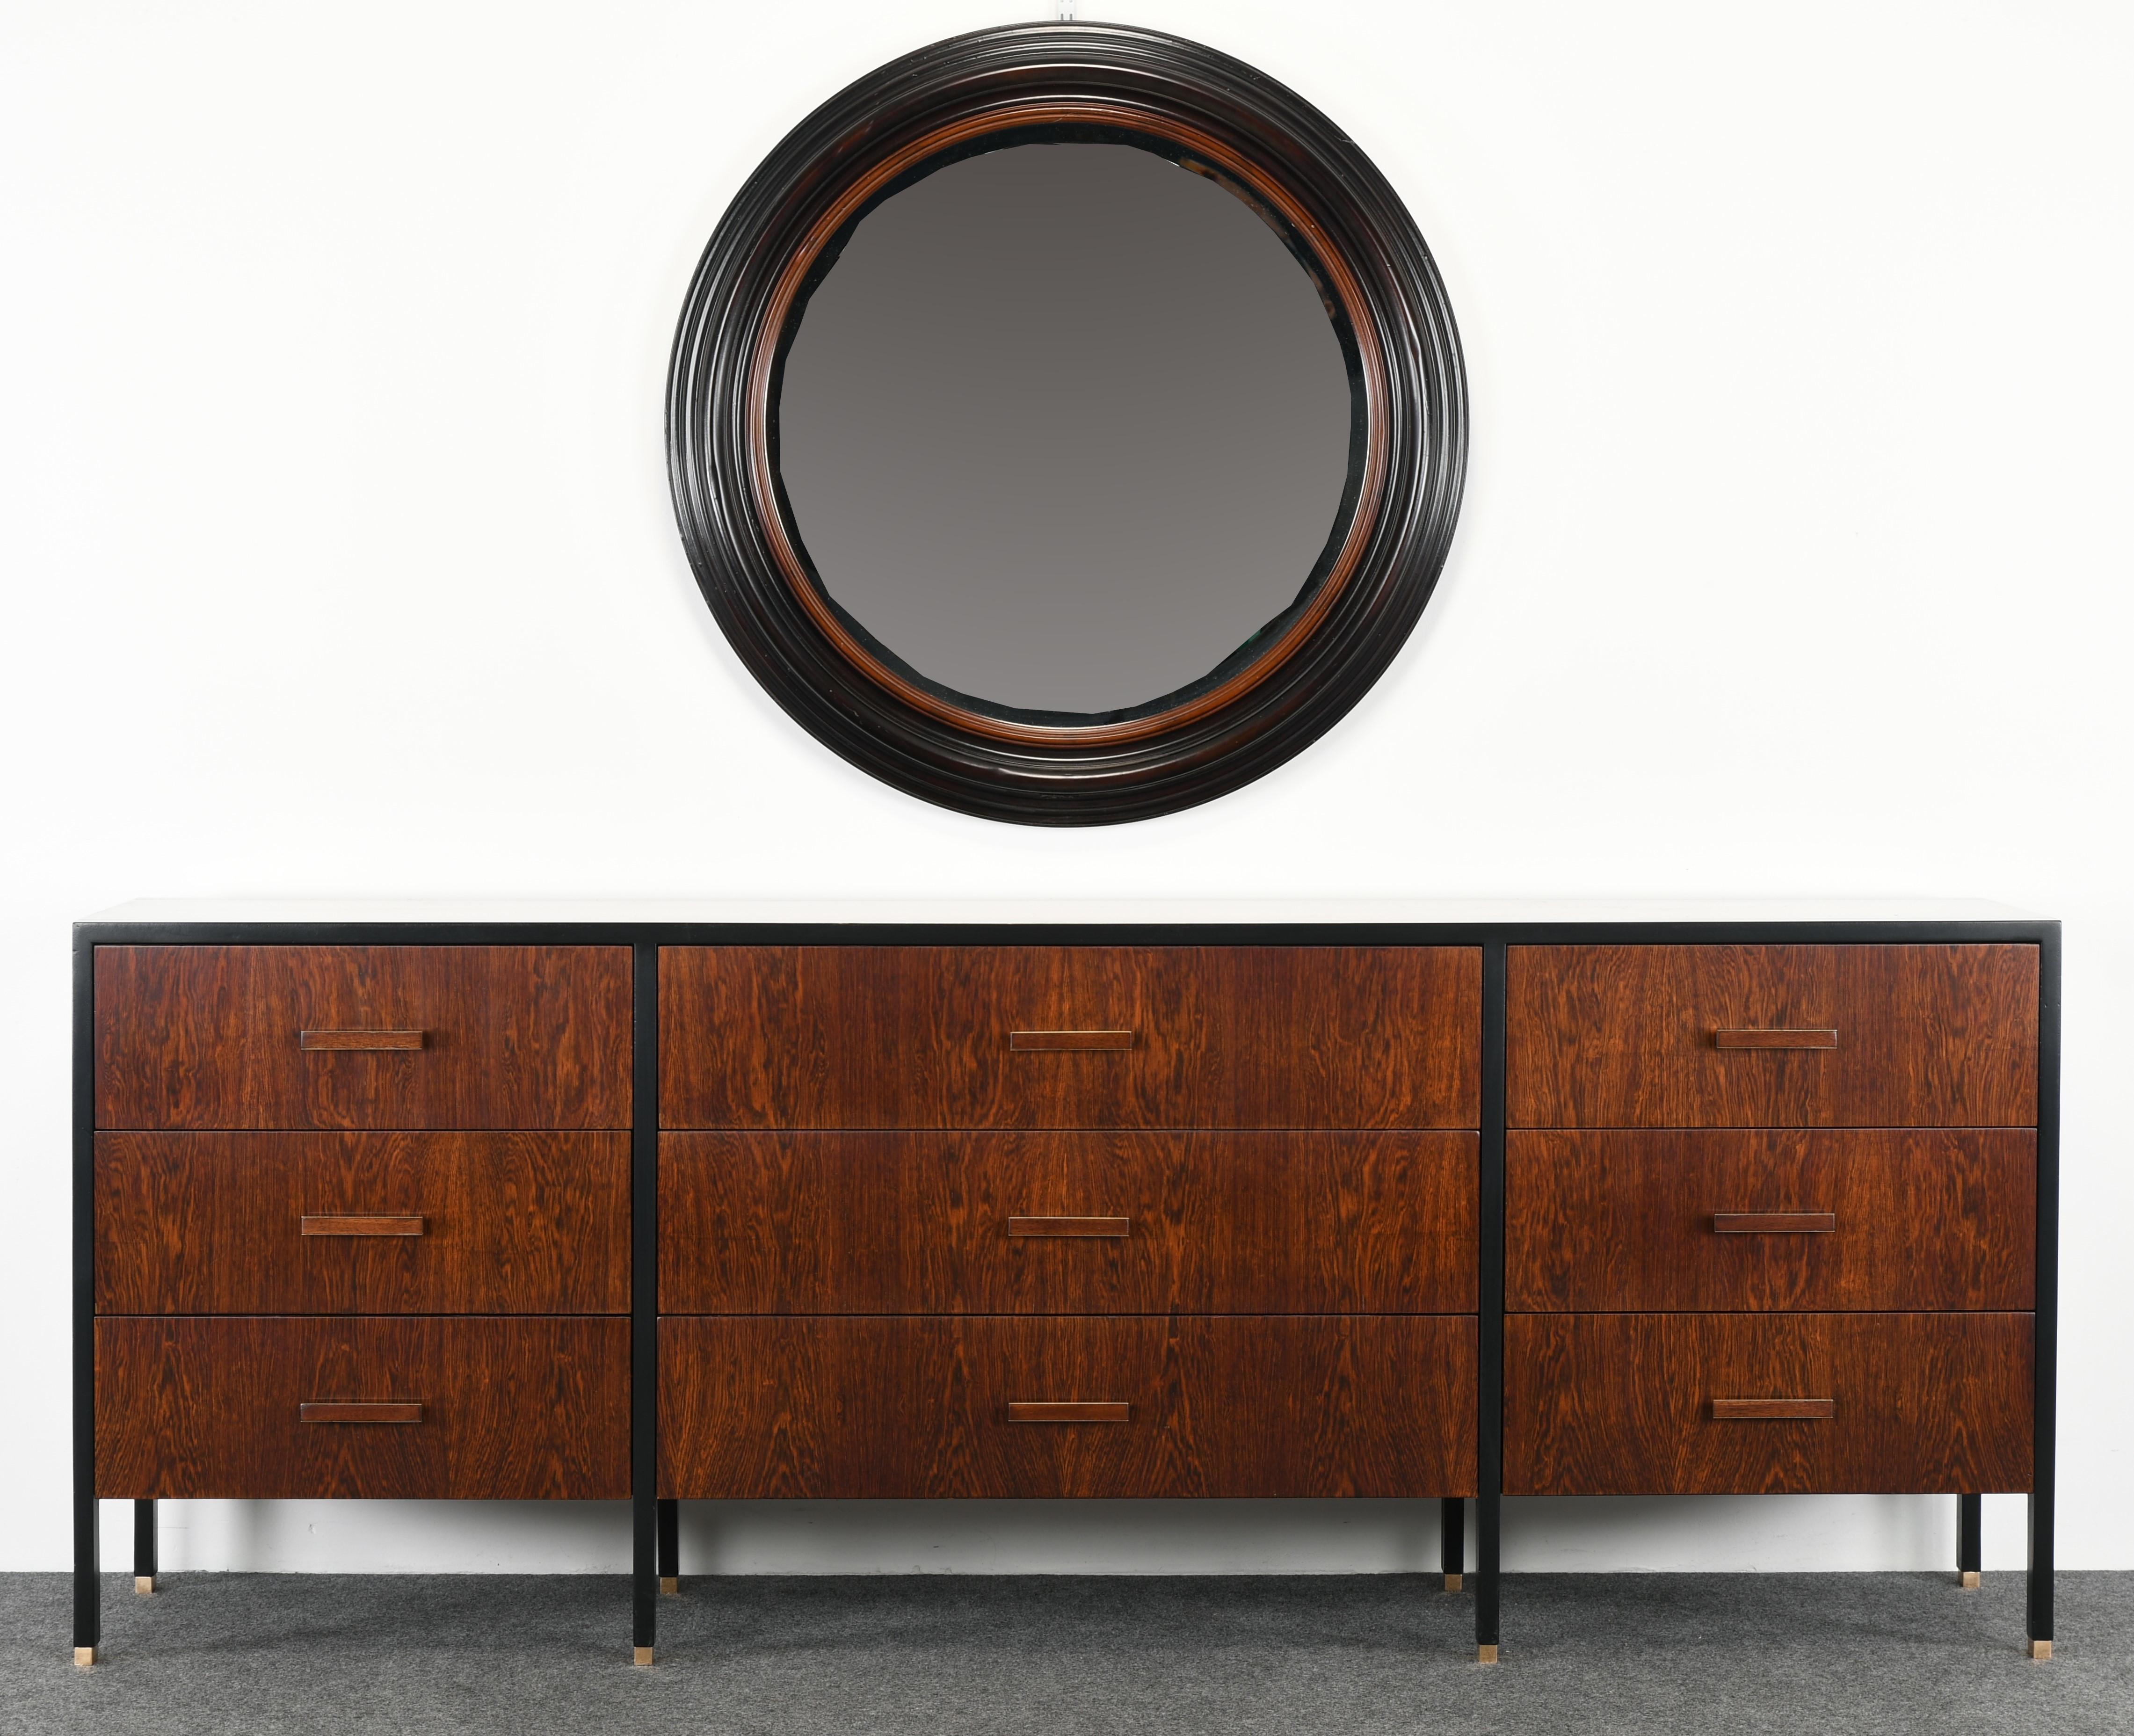 A stunning round ebonized maple wood mirror with natural wood accent and beveled glass. This mirror would look great in a modern or antique setting. Labeled 